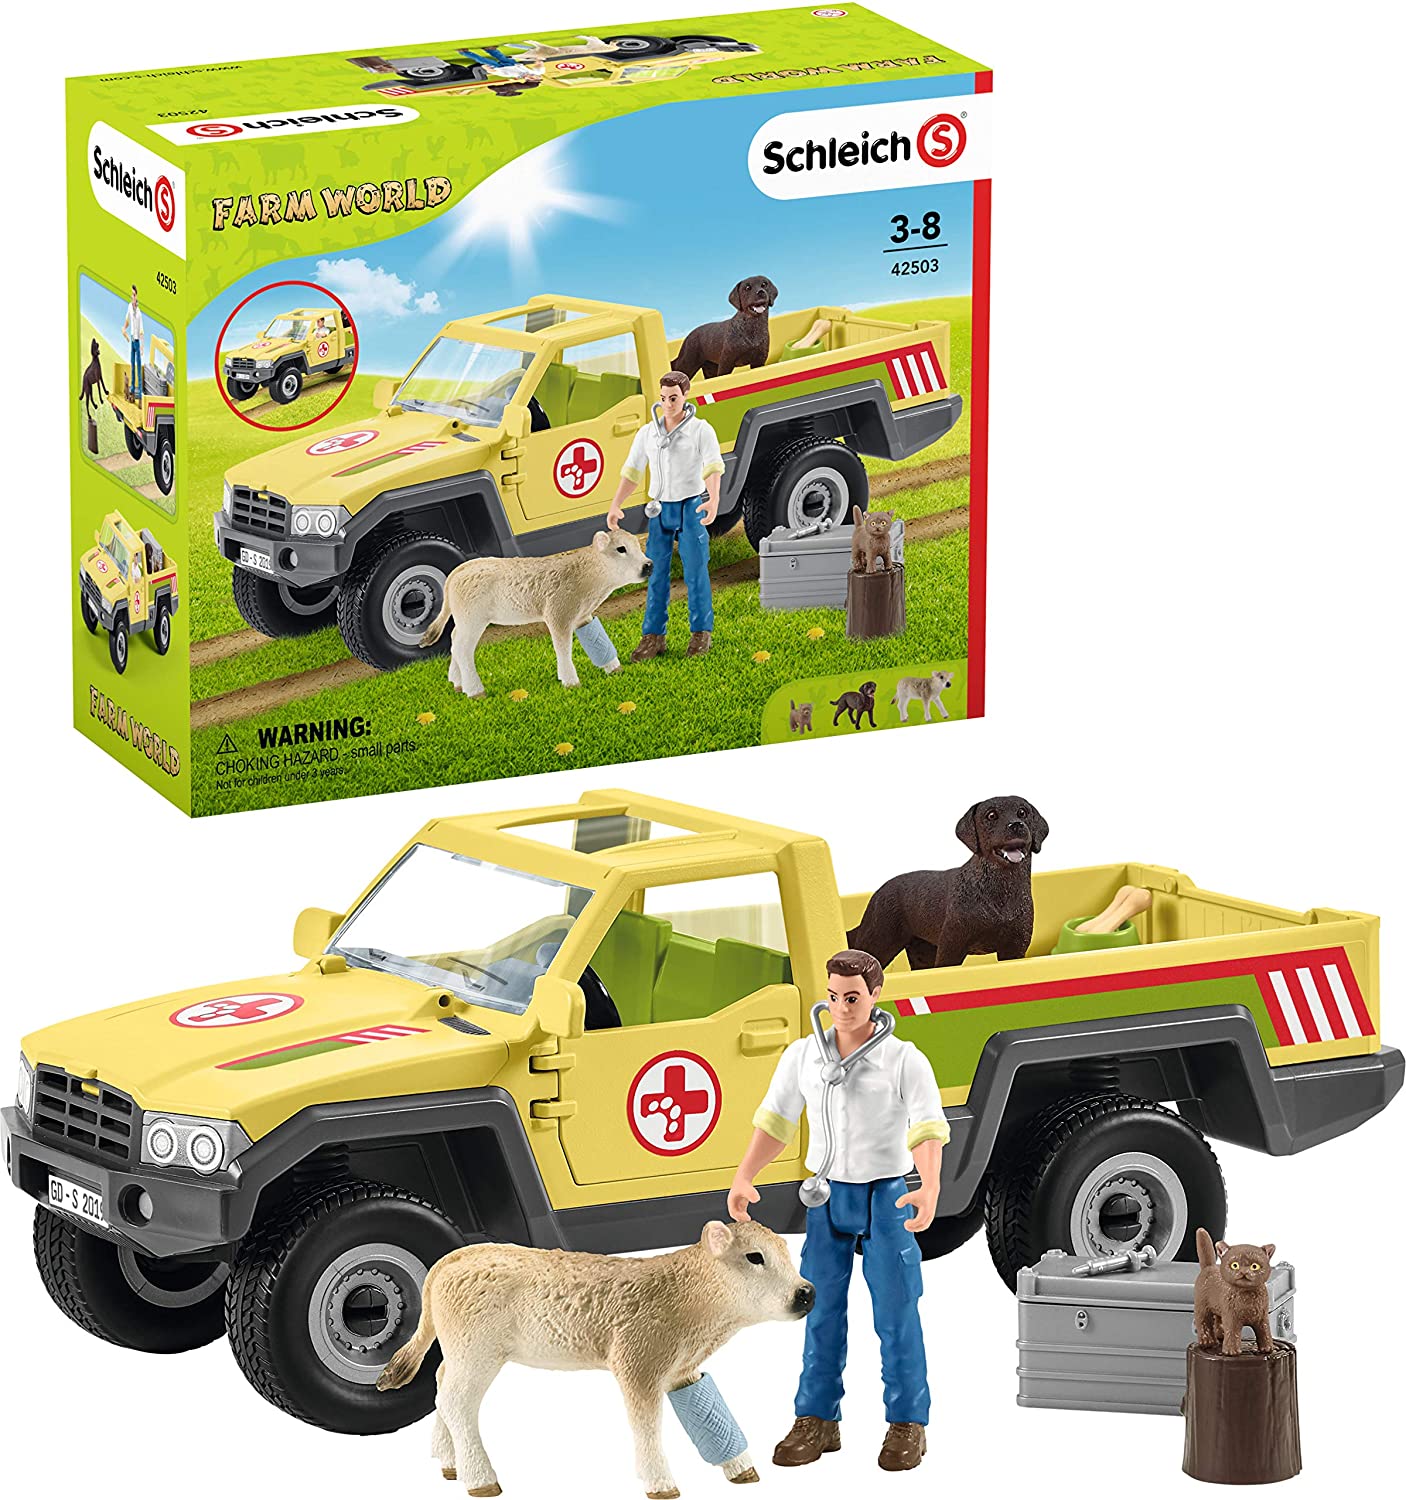 Schleich 42503 Farm World Playset - Vet visit to the farm, Toy from 3 years